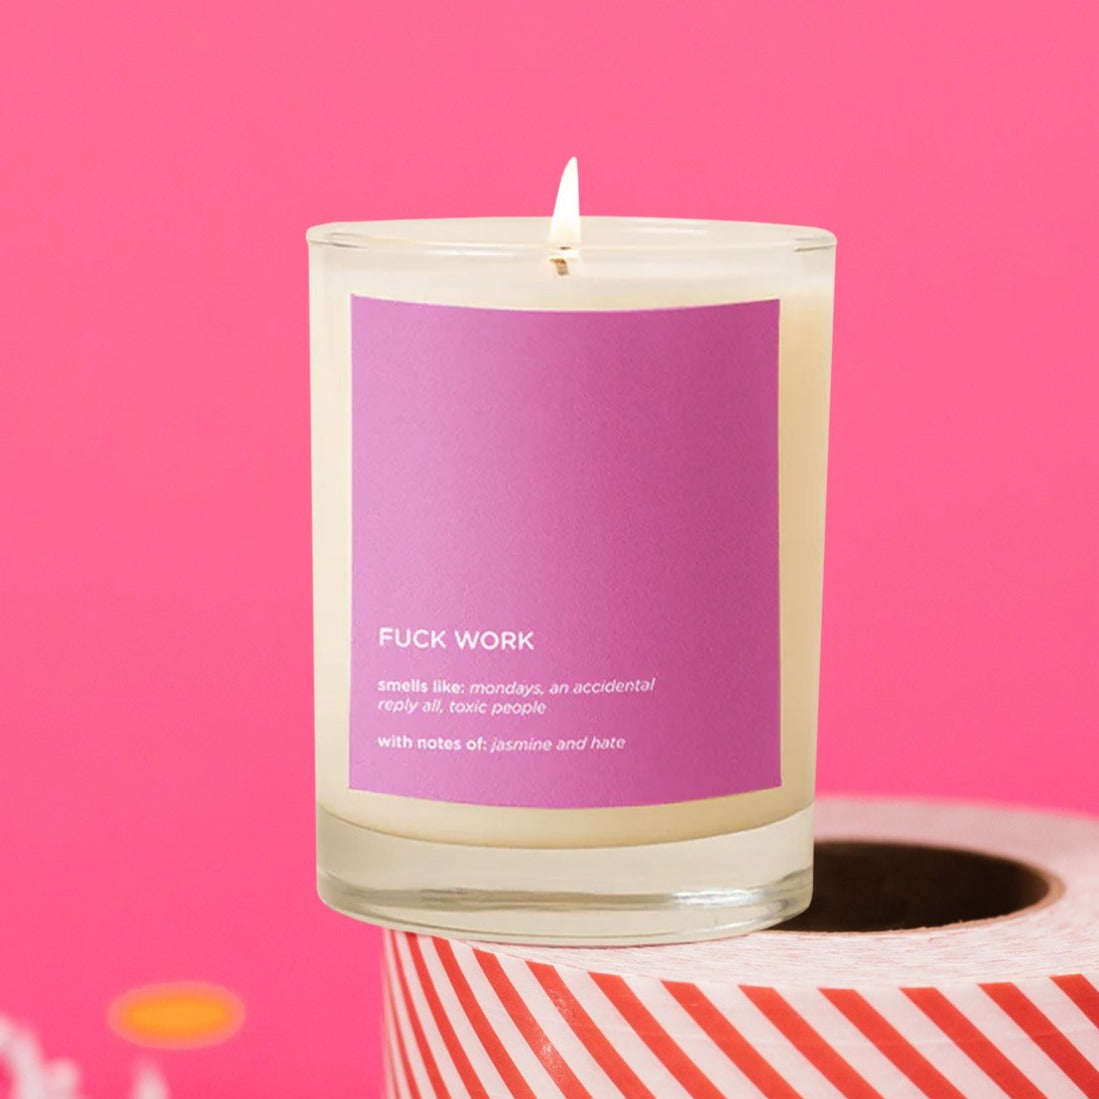 On a hot pink background sits a candle atop a roll of red and white striped packing tape. There are white crinkle and big, colorful confetti scattered around. The picture is a close-up of a glass candle that is lit and has a hot pink label on the front. It says "FUCK WORK," "smells like: mondays, an accidental reply all, toxic people," "with notes of: jasmine and hate." It is in a white, block font."